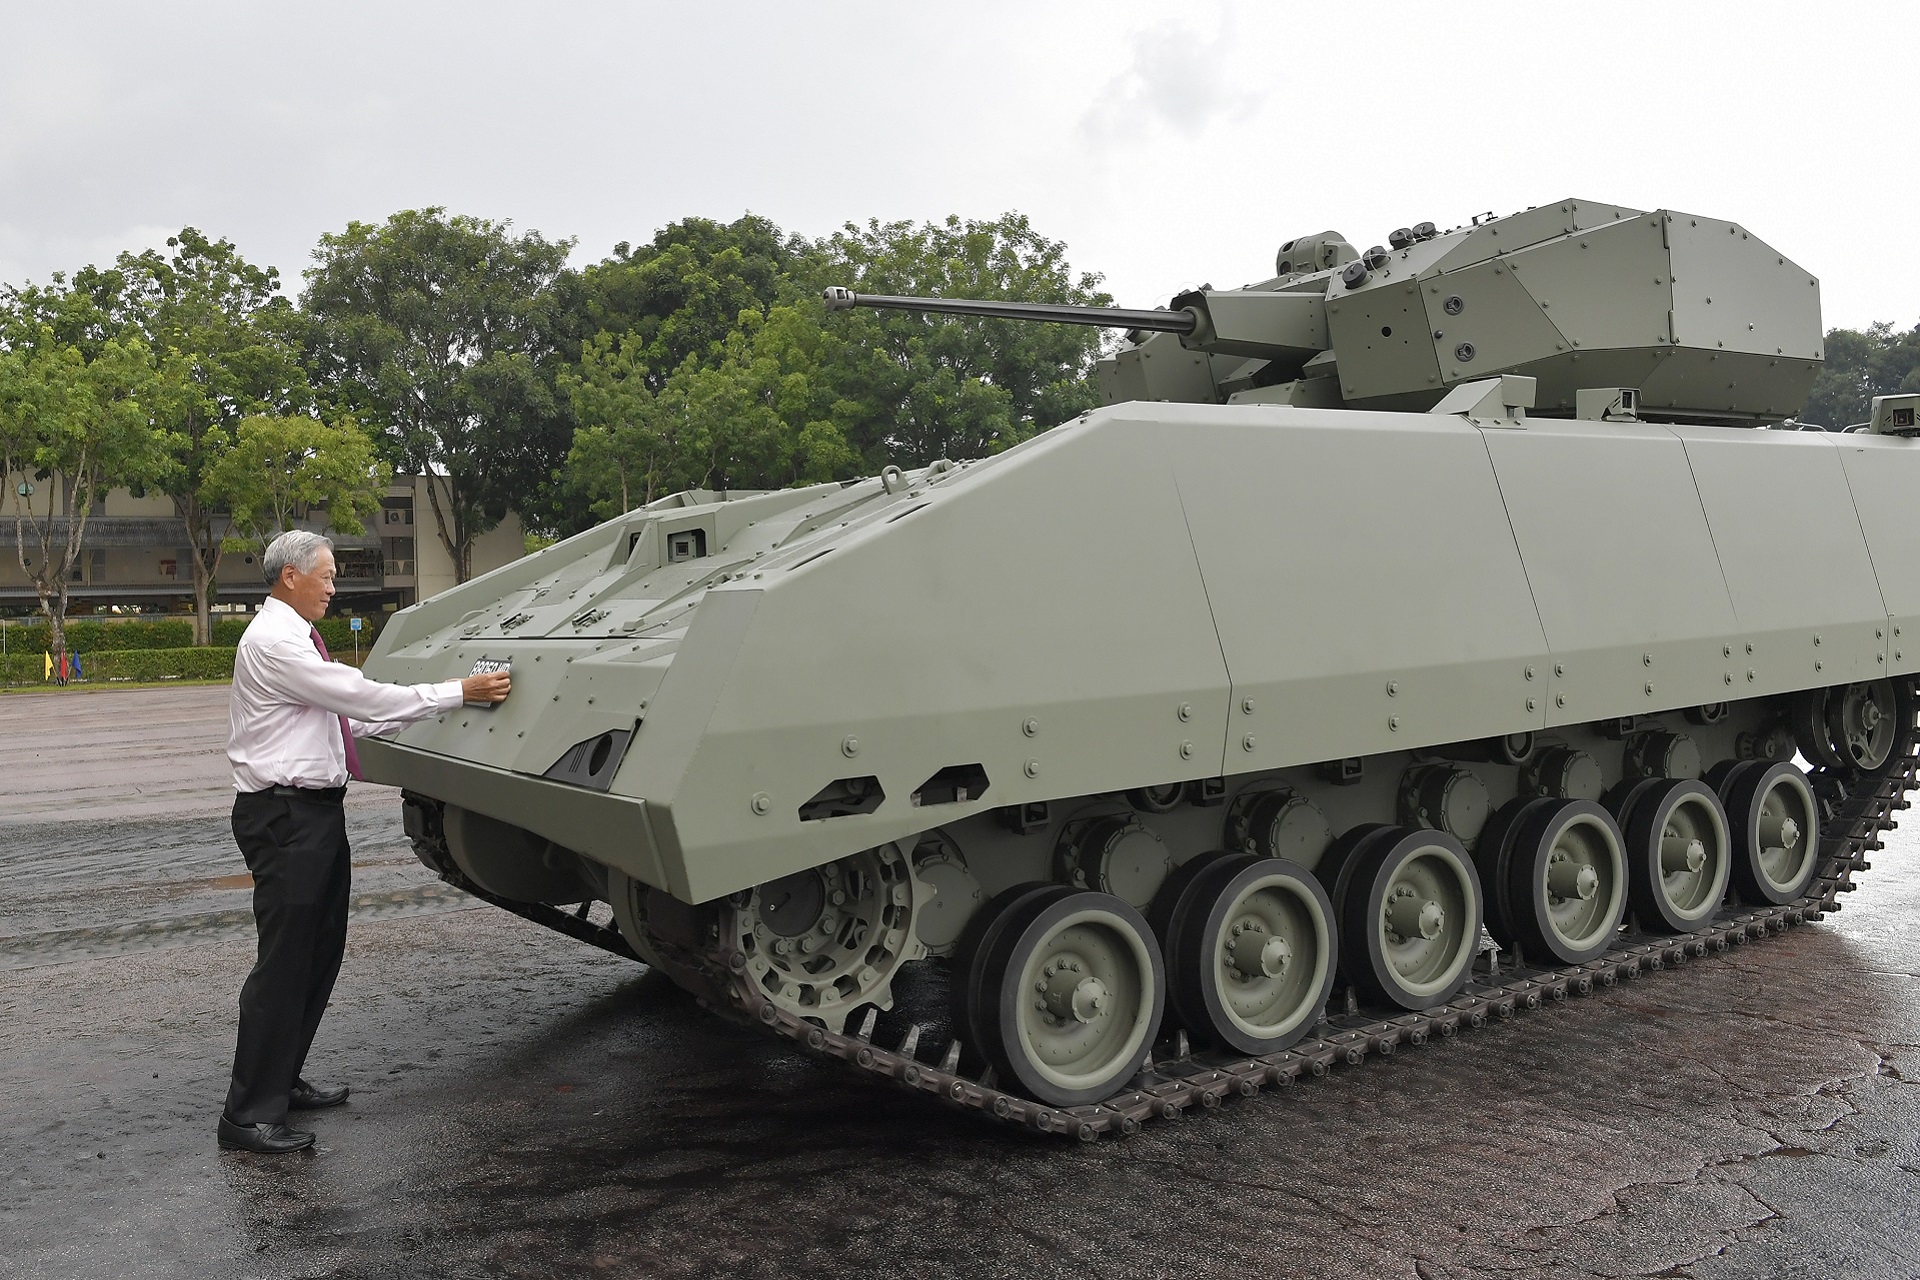 Dr Ng commissions the Hunter Armoured Fighting Vehicle by affixing the licence plate on the platform.